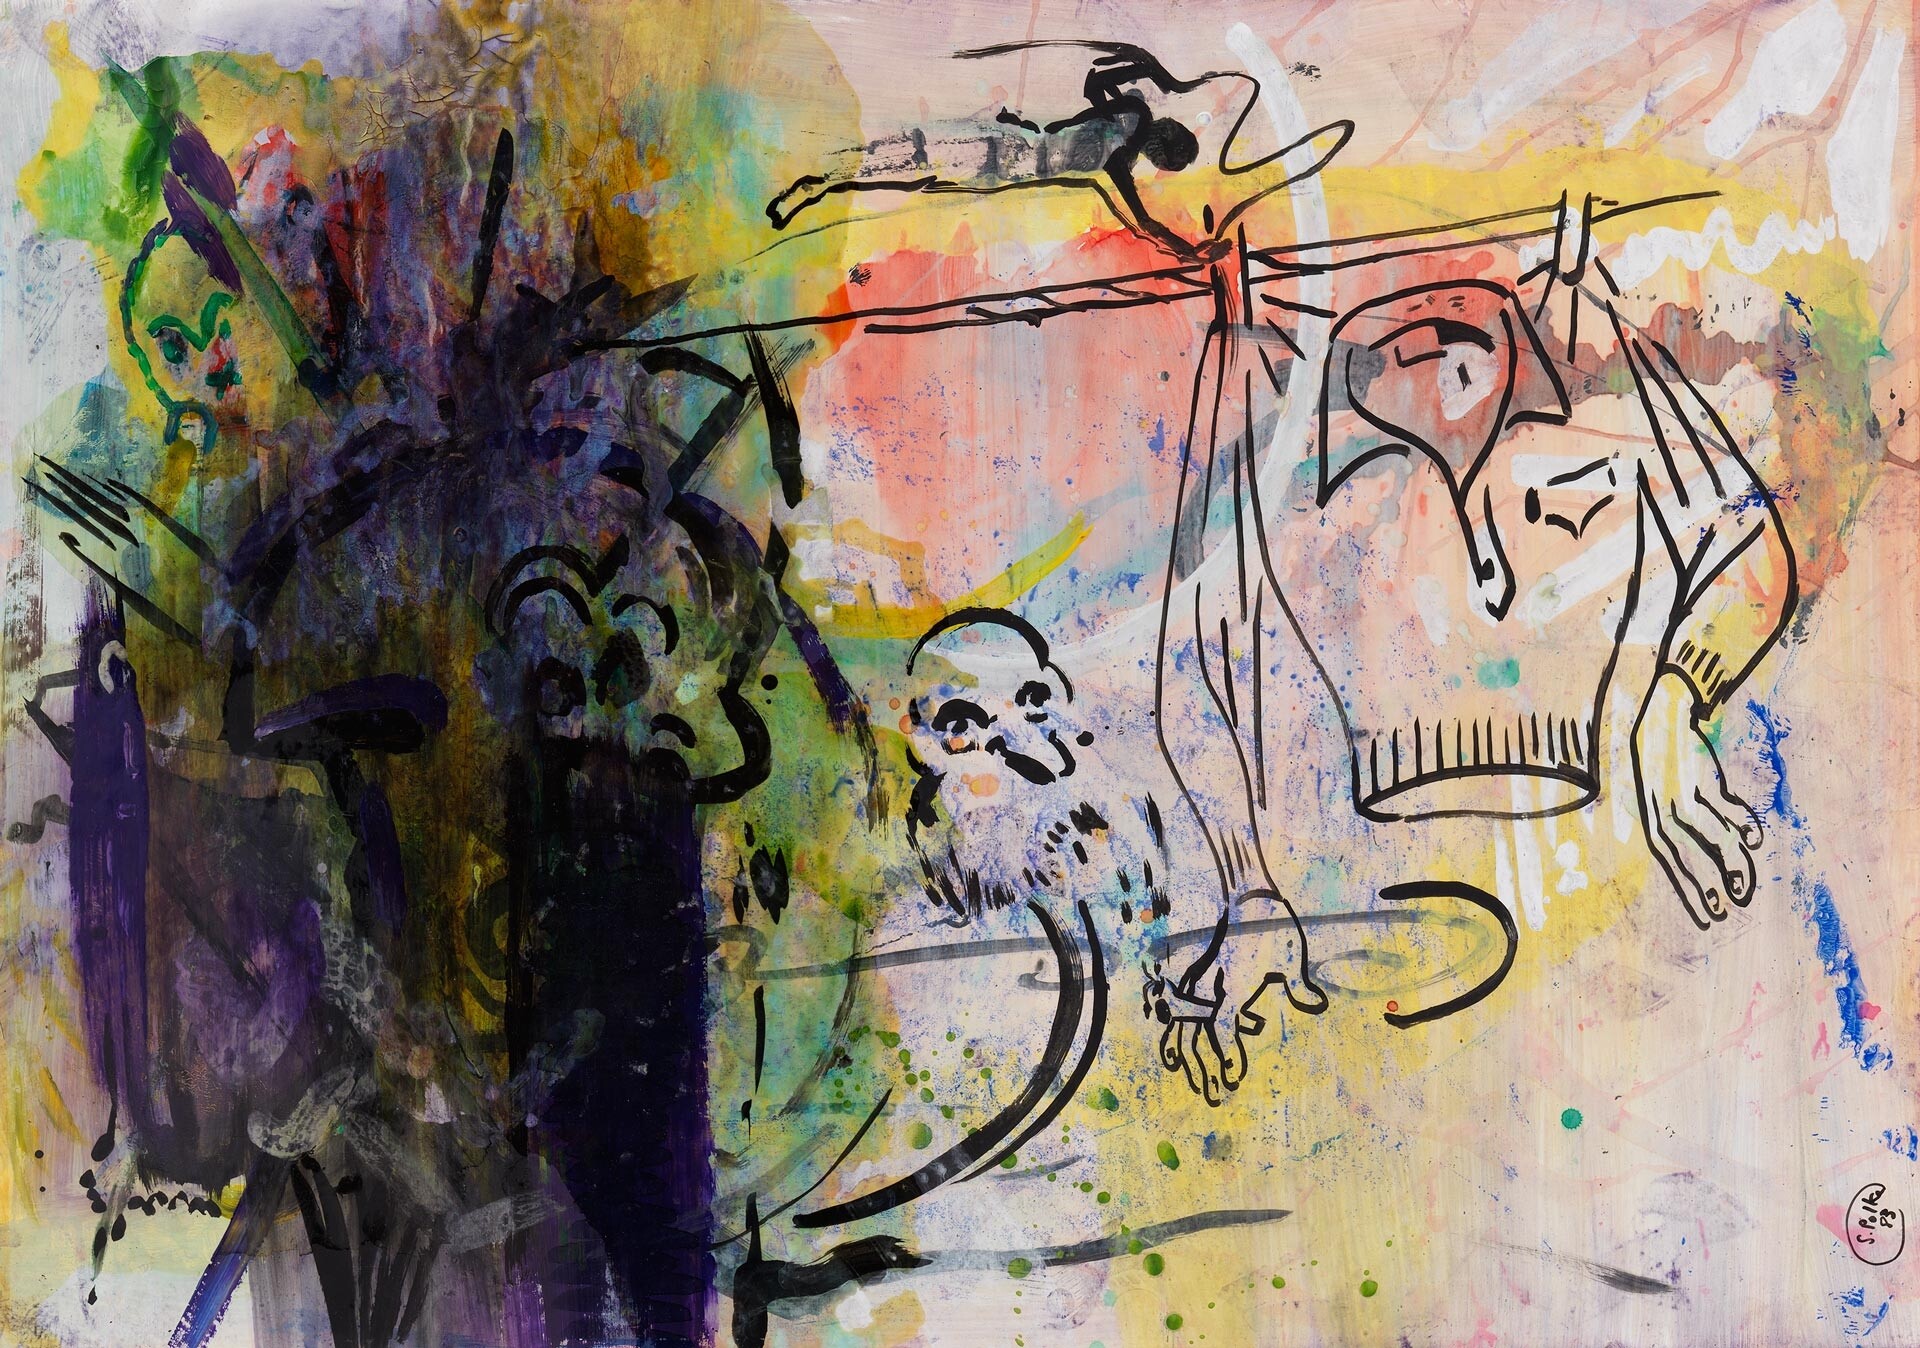 An untitled painting by Sigmar Polke, dated 1983.